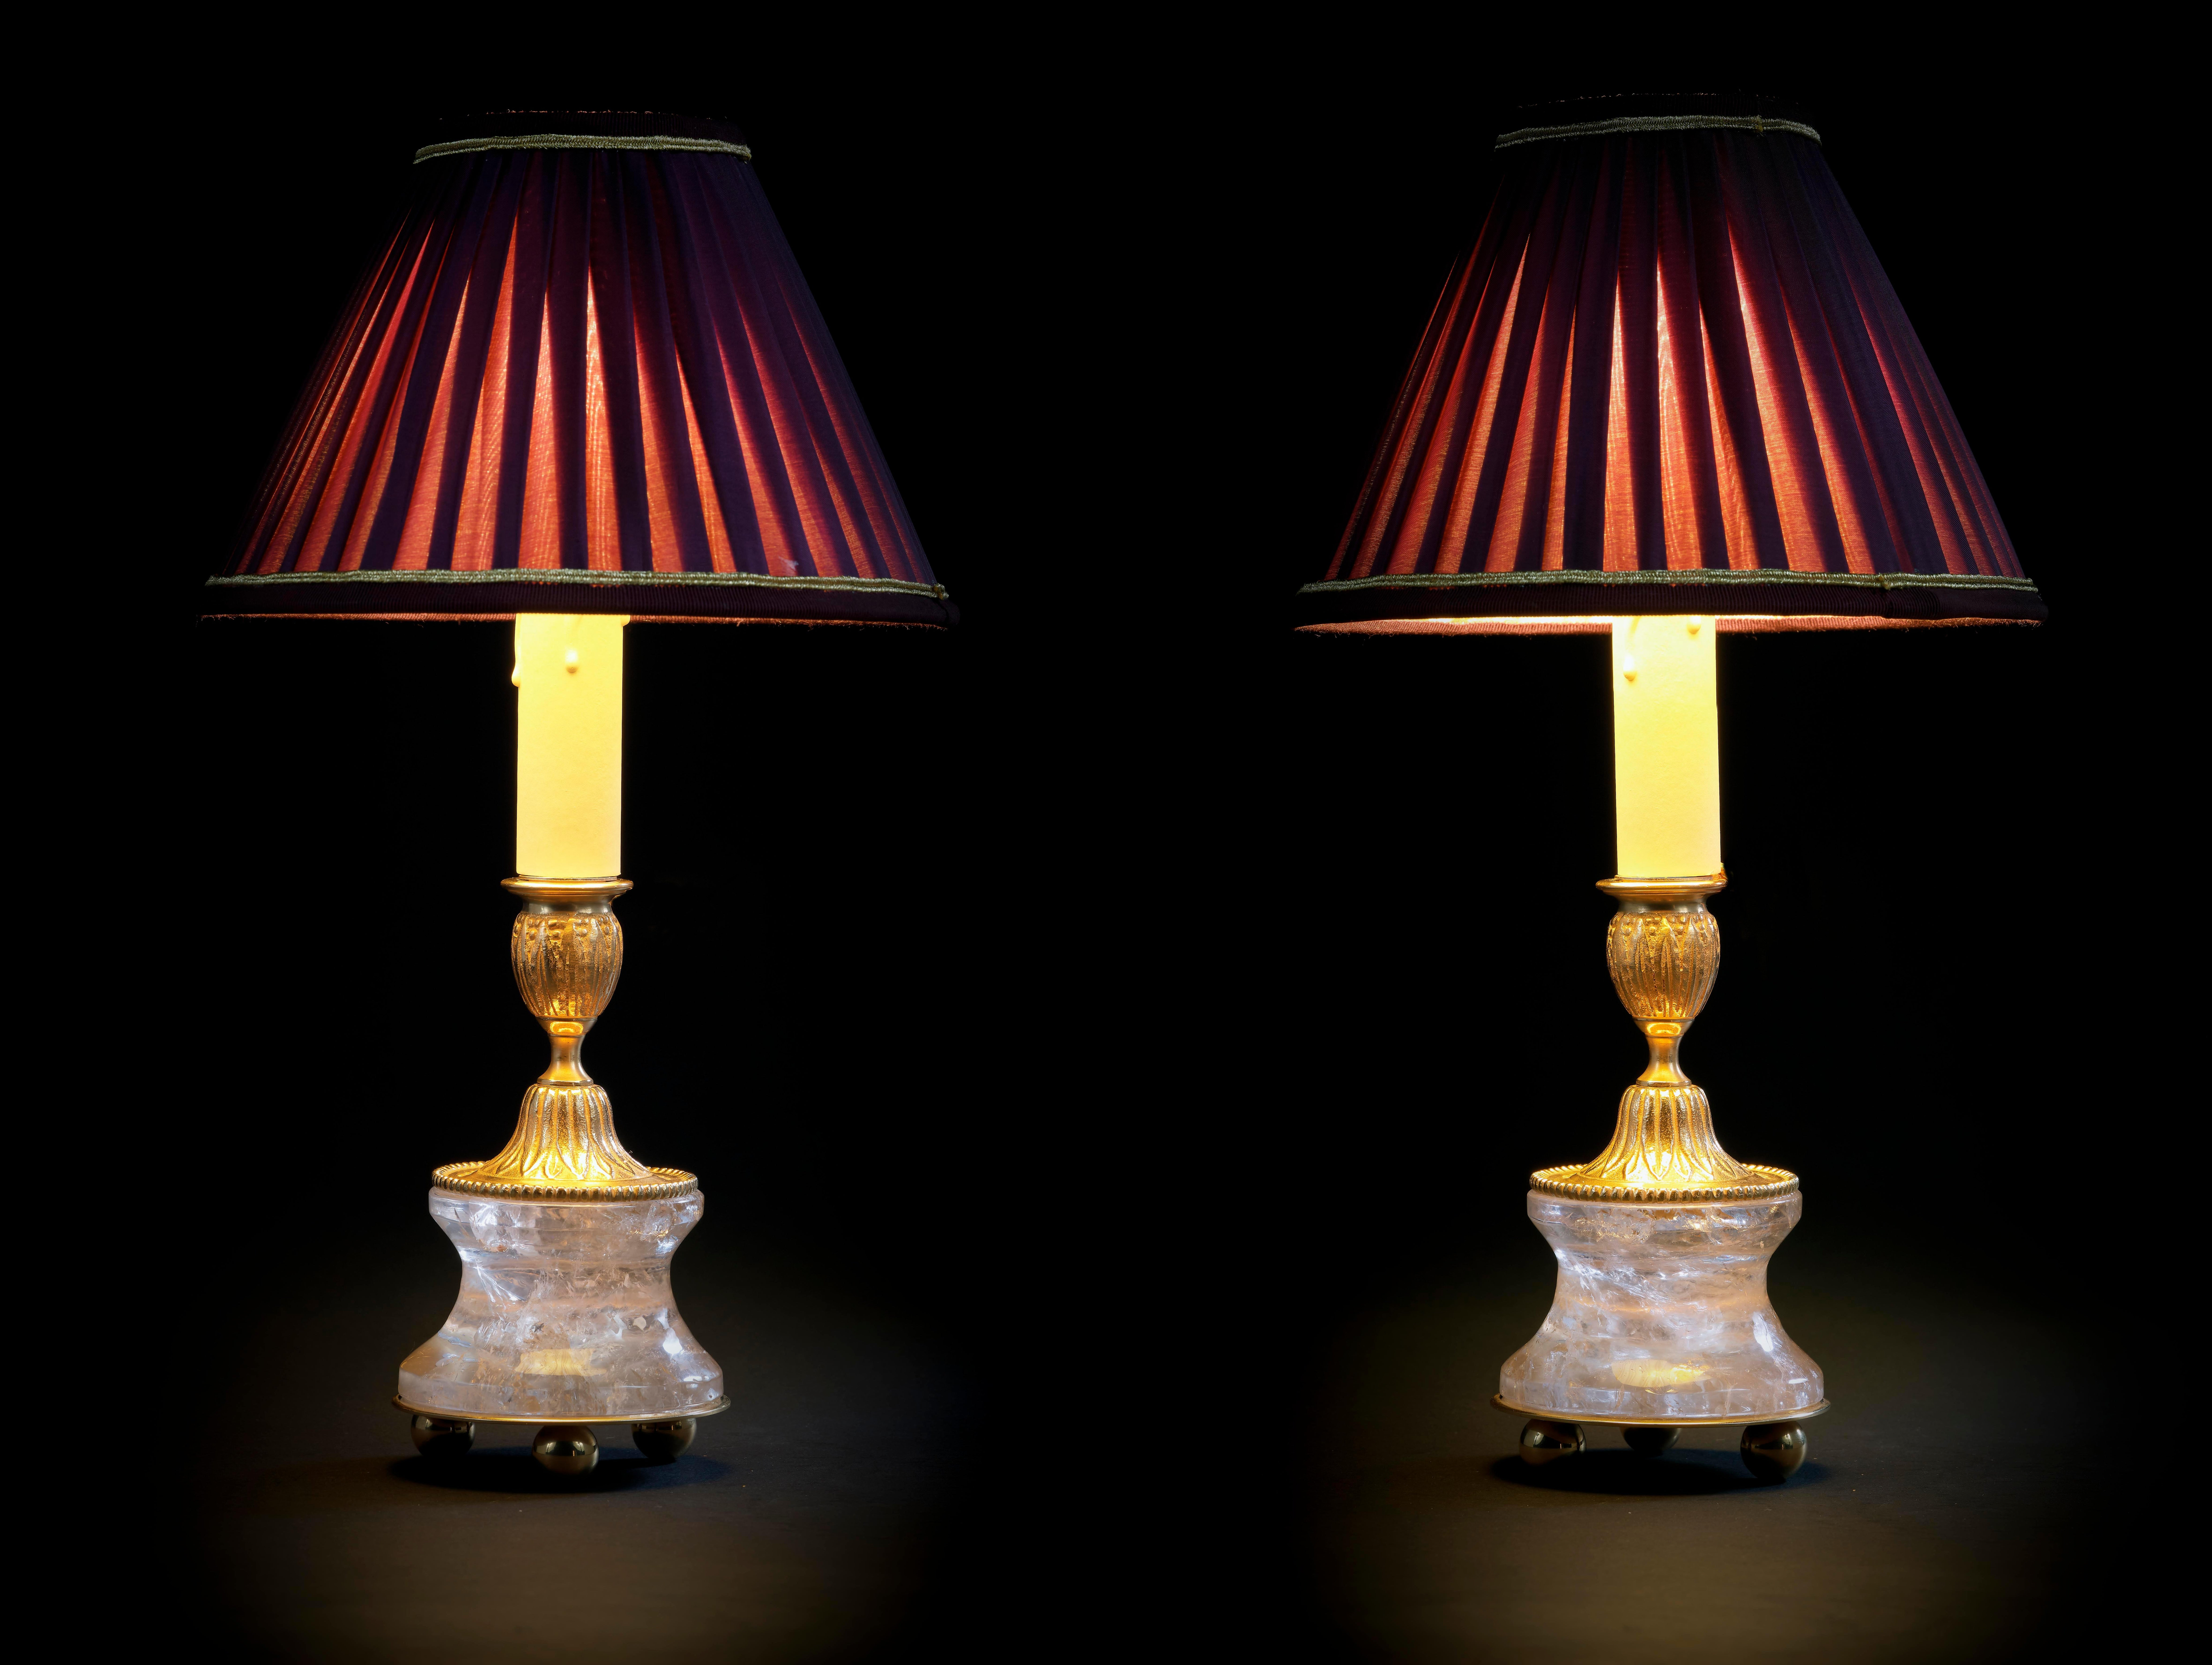 Rock Crystal Louis The XVI th style 24-karat Ormolu gilding bronze purple lampshades made by Alexandre Vossion. This model can be also used as candlesticks to make your dining table so chic ... Others colors for the lampshades are also available and